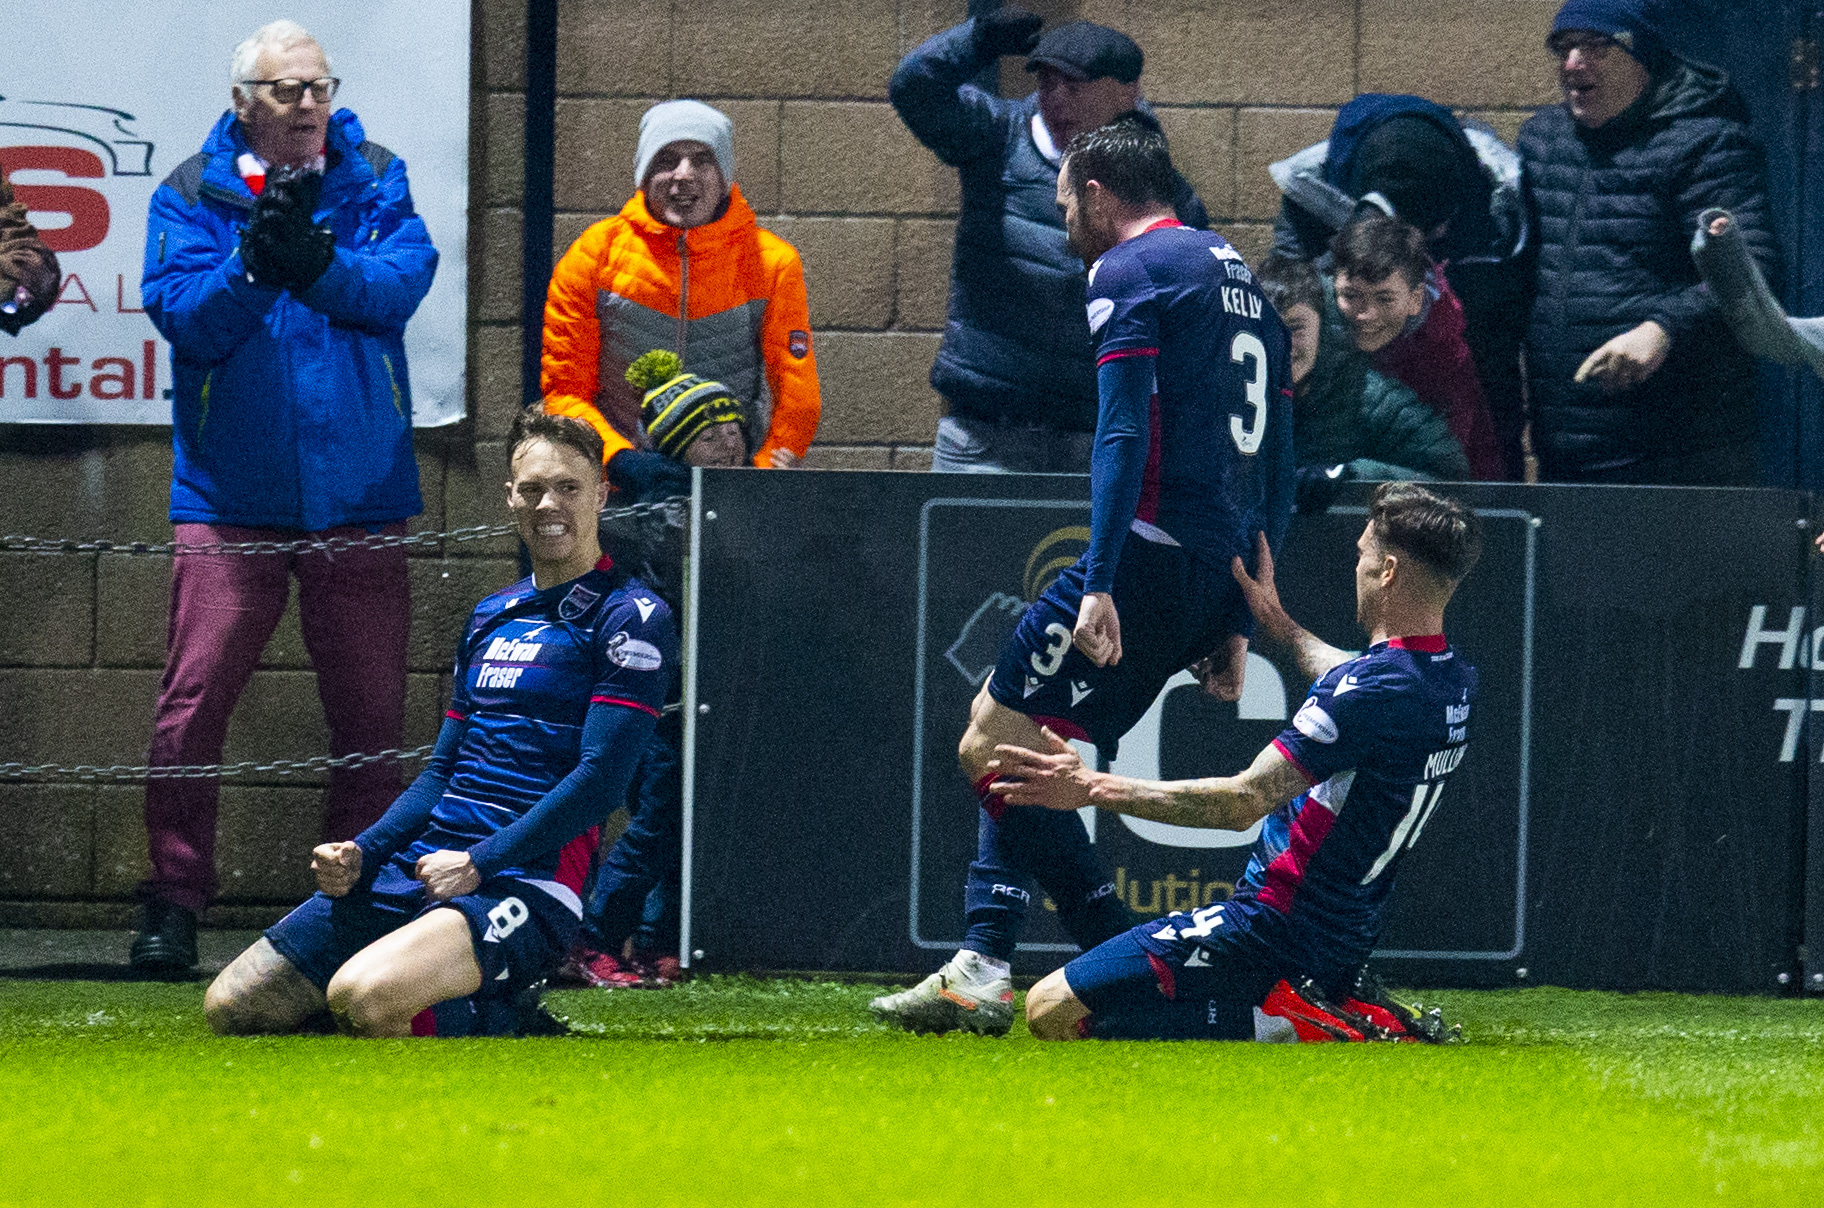 Ross County's Lee Erwin celebrates after scoring to make it 1-0 during the Ladbrokes Premiership match between Ross County and Kilmarnock.